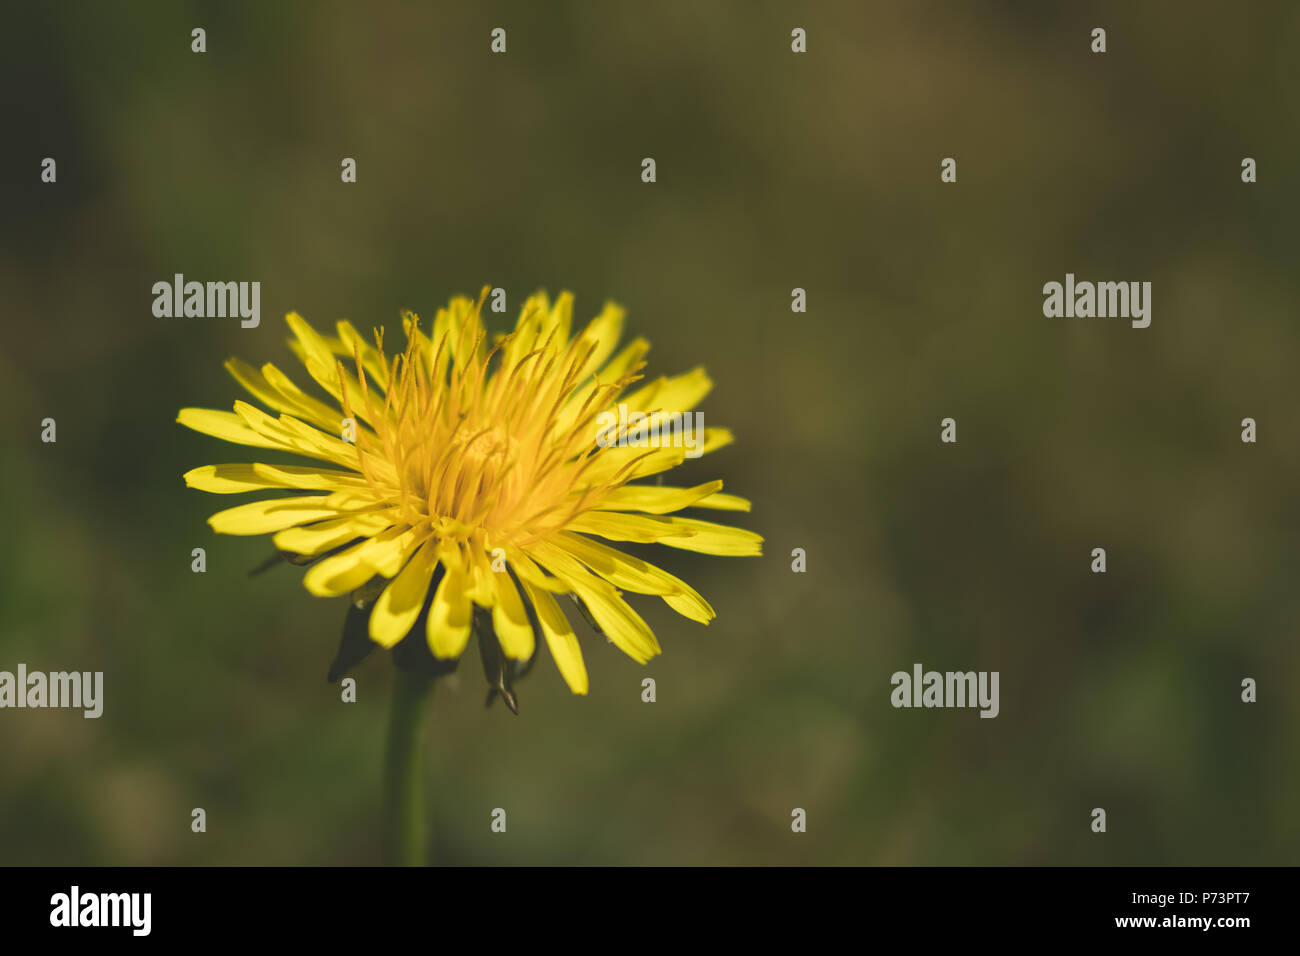 Single stem of common dandelion (Taraxacum officinale) in bloom with green bokeh background Stock Photo